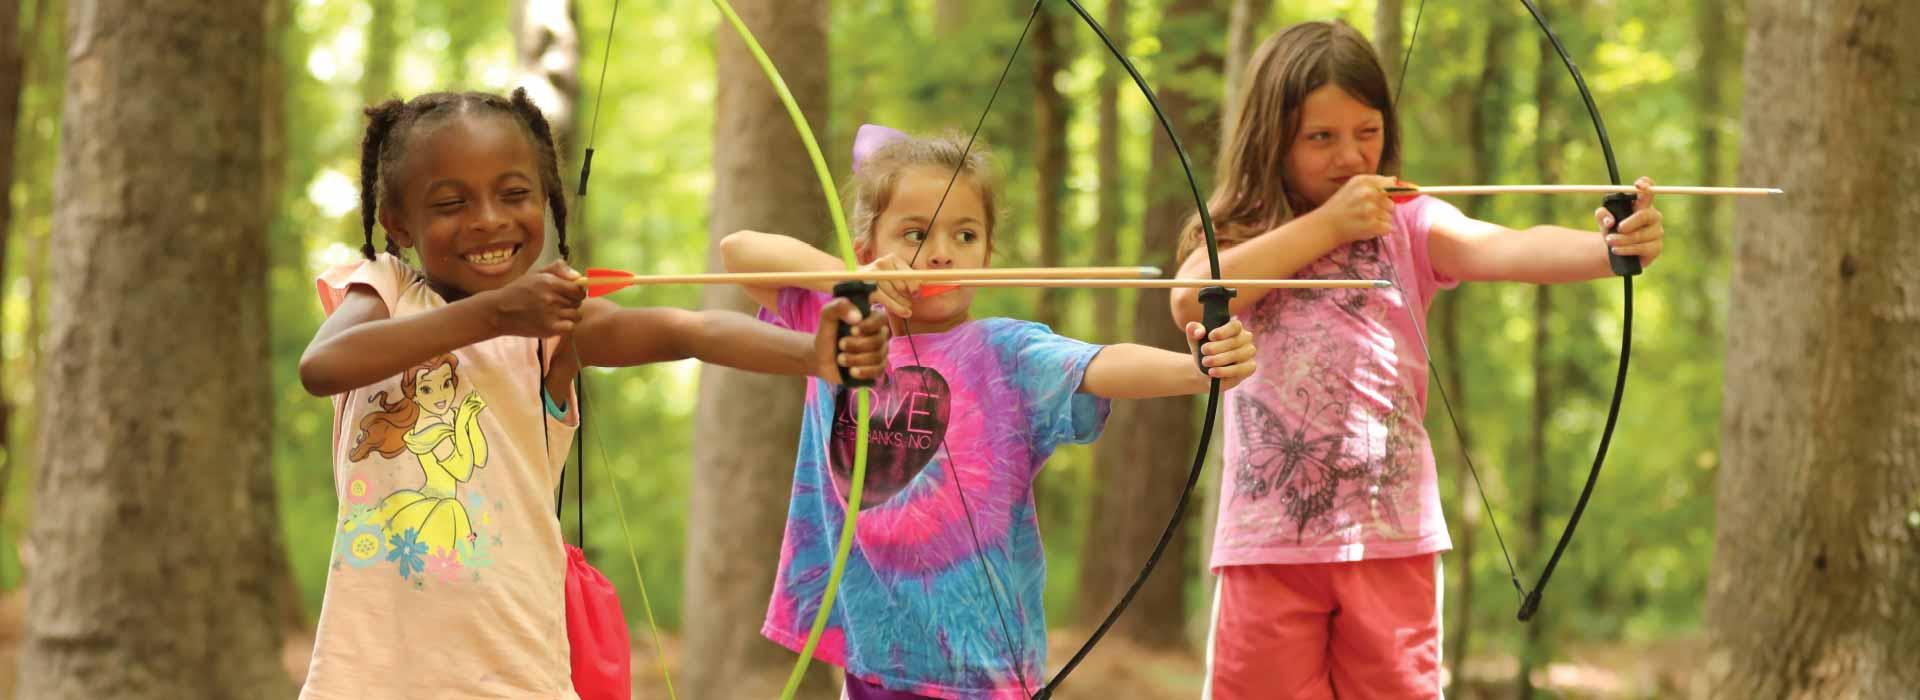 Three female campers shooting arrows at targets